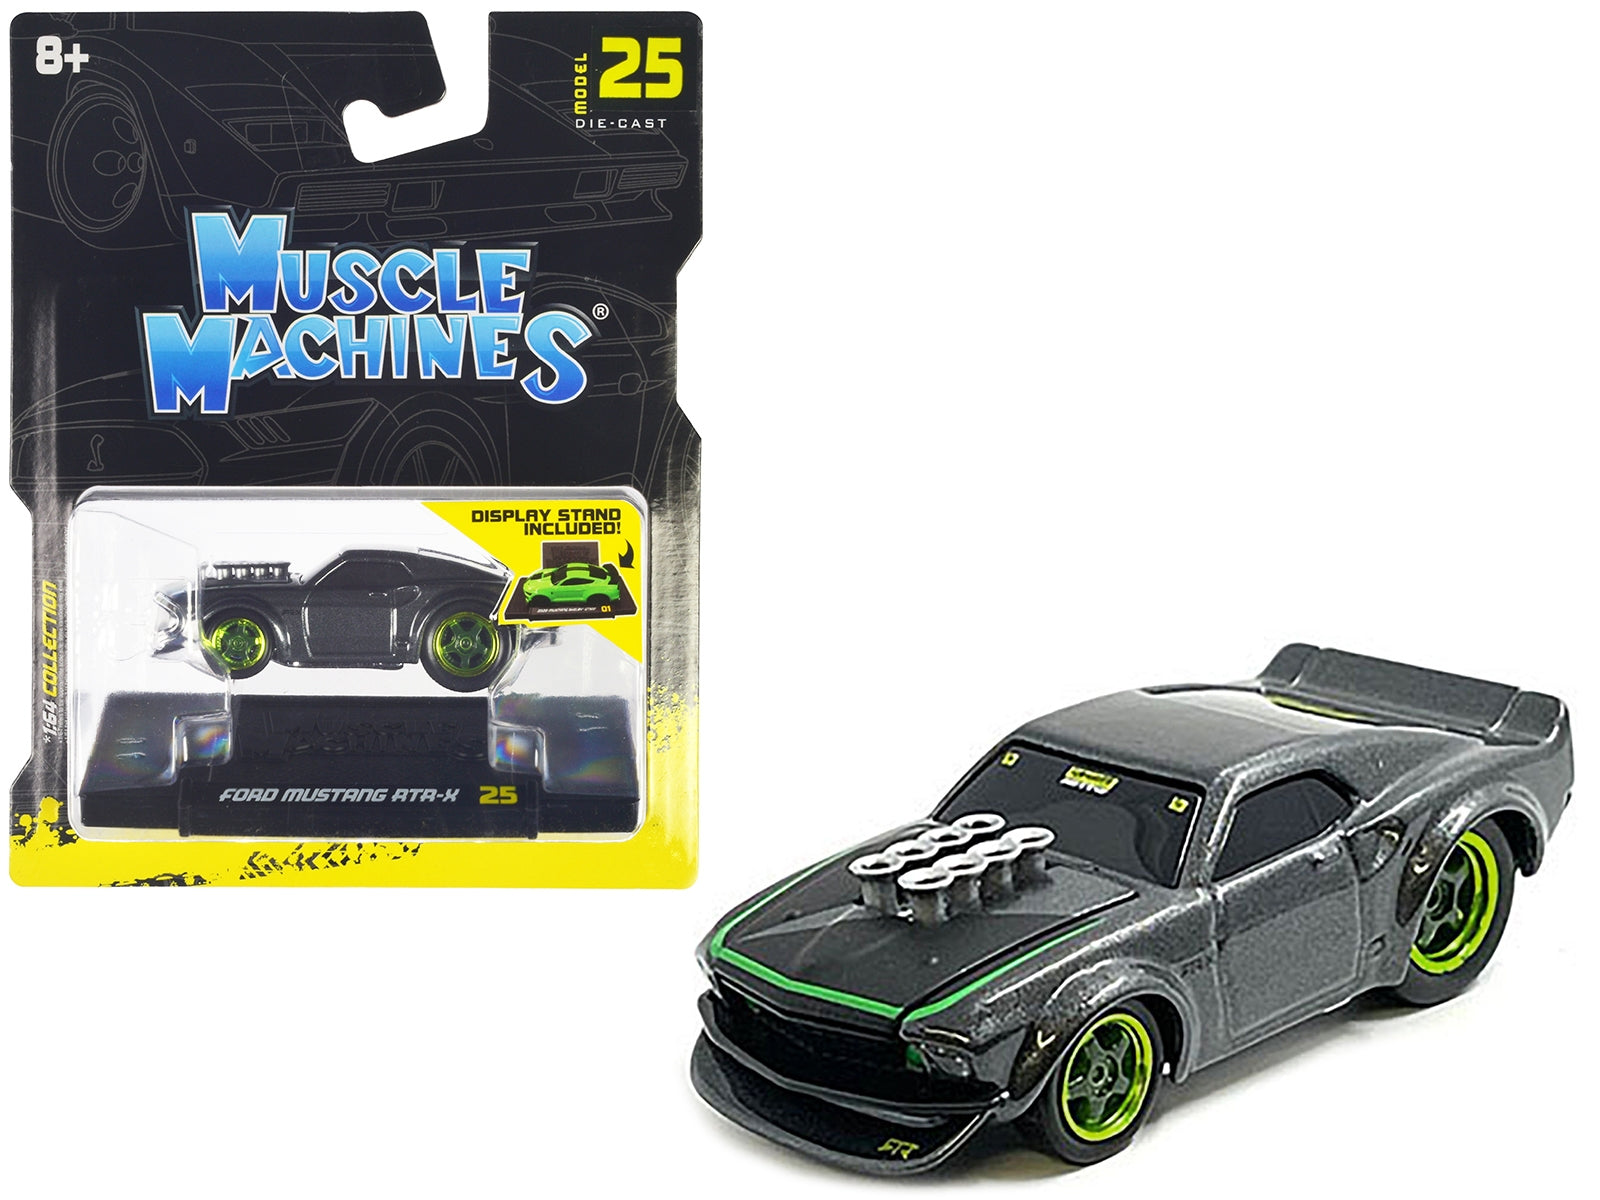 Ford Mustang RTR-X Gray Metallic 1/64 Diecast Model Car by Muscle Machines